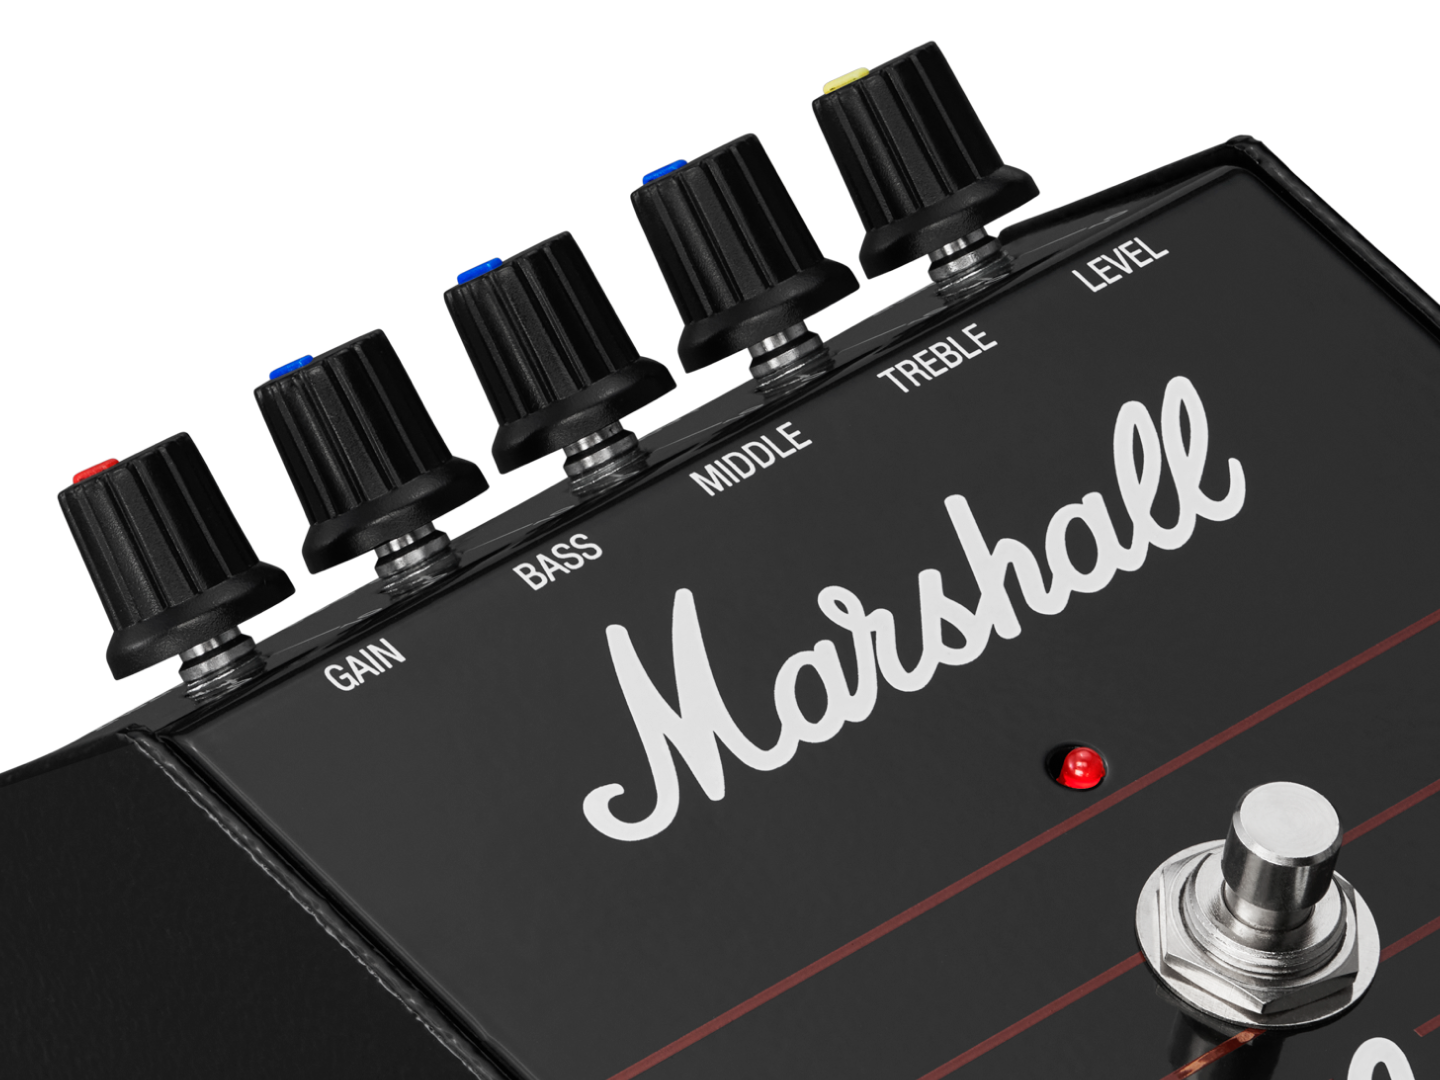 The Guv'nor pedal is ideal for smooth overdriven tones | Marshall.com